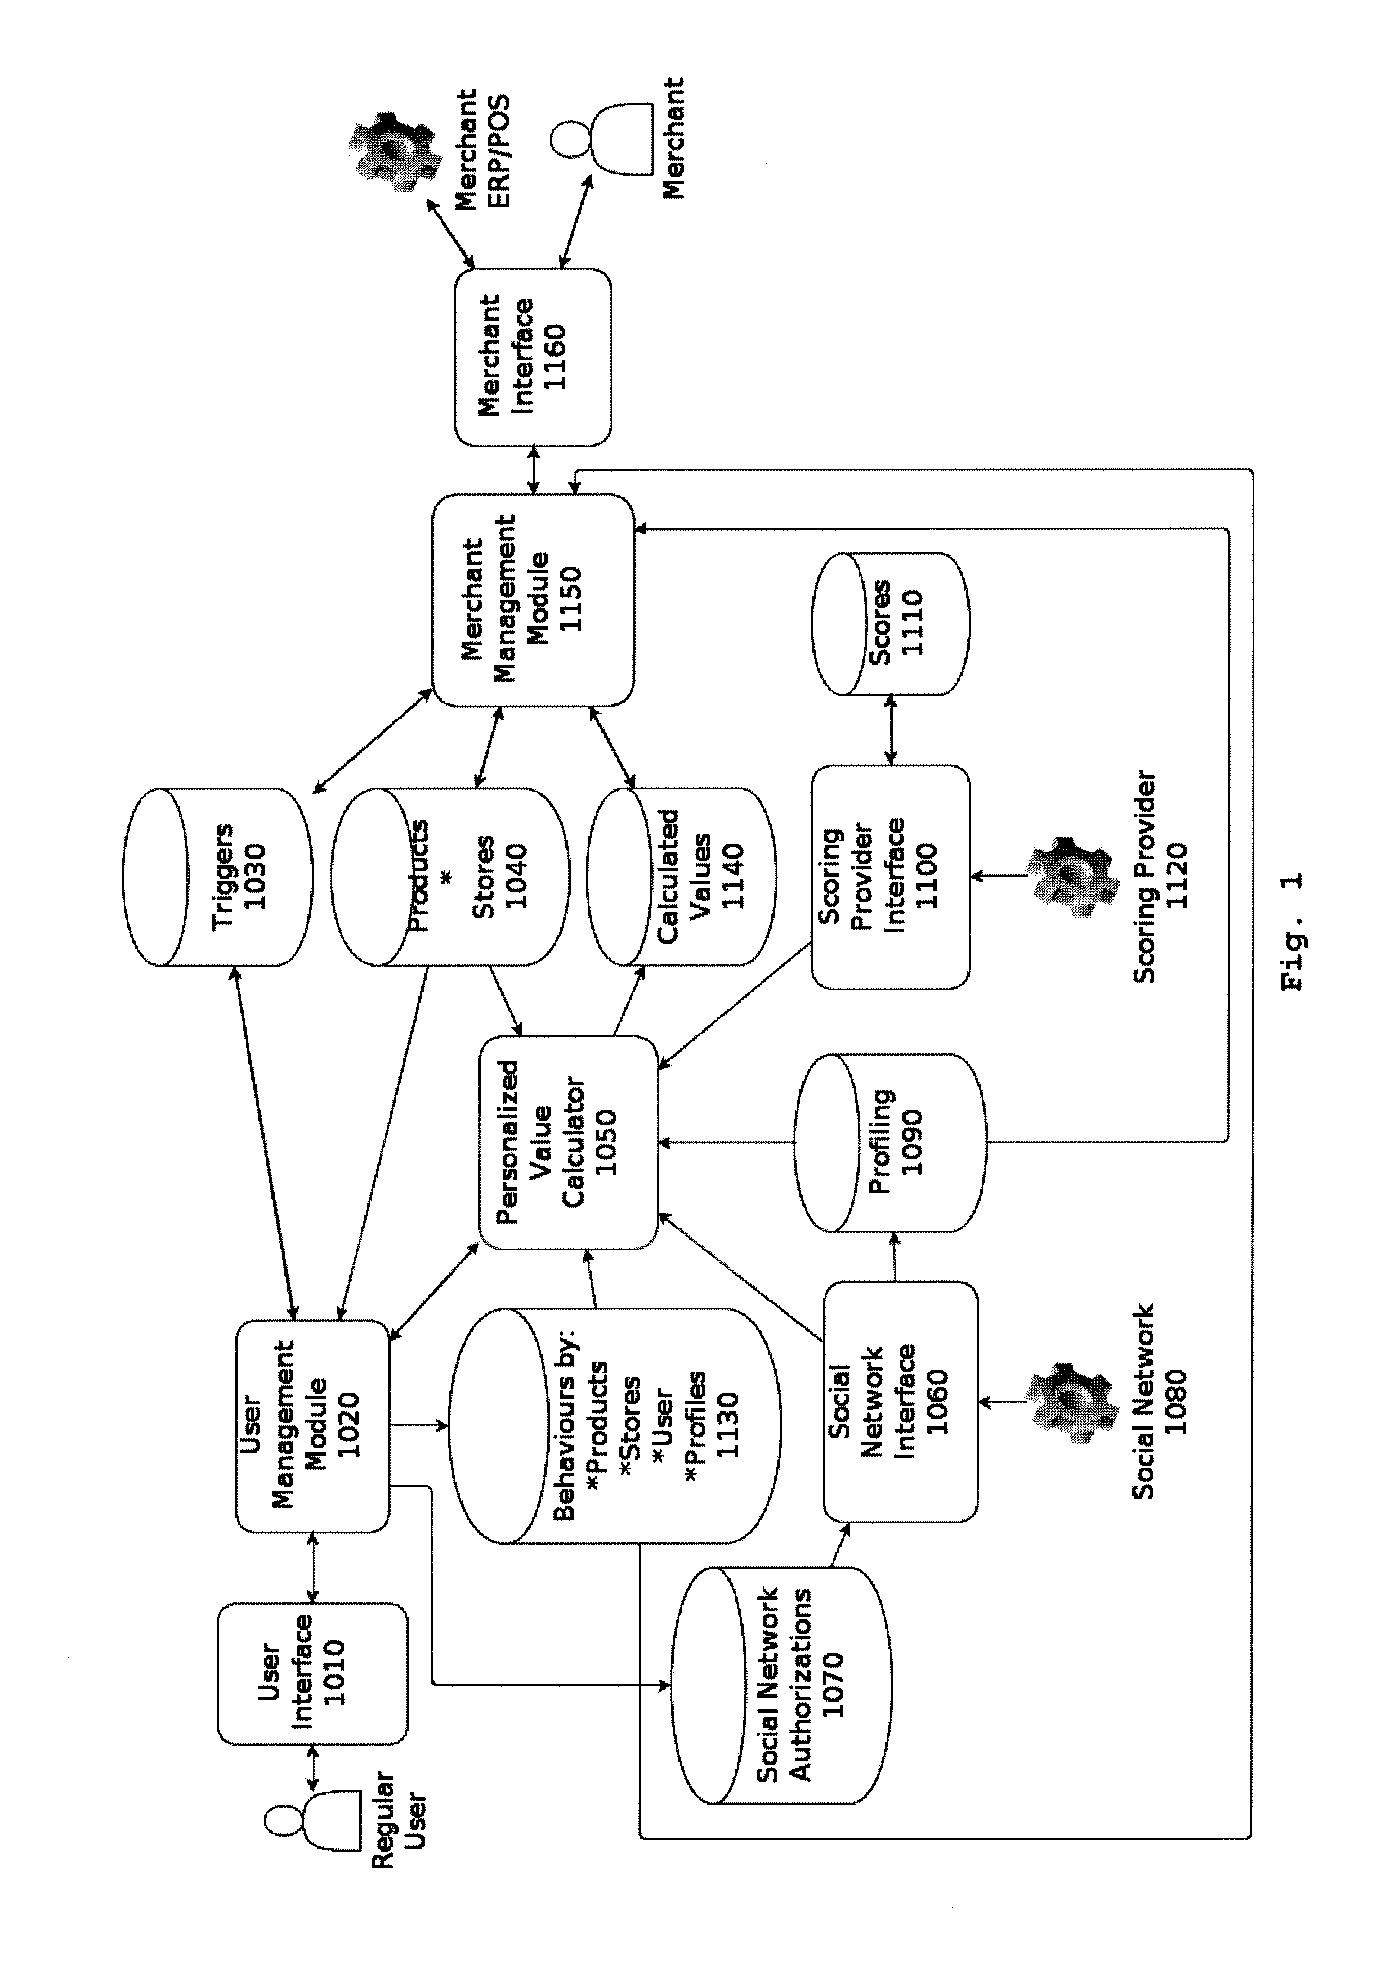 System and method for calculating dynamic prices